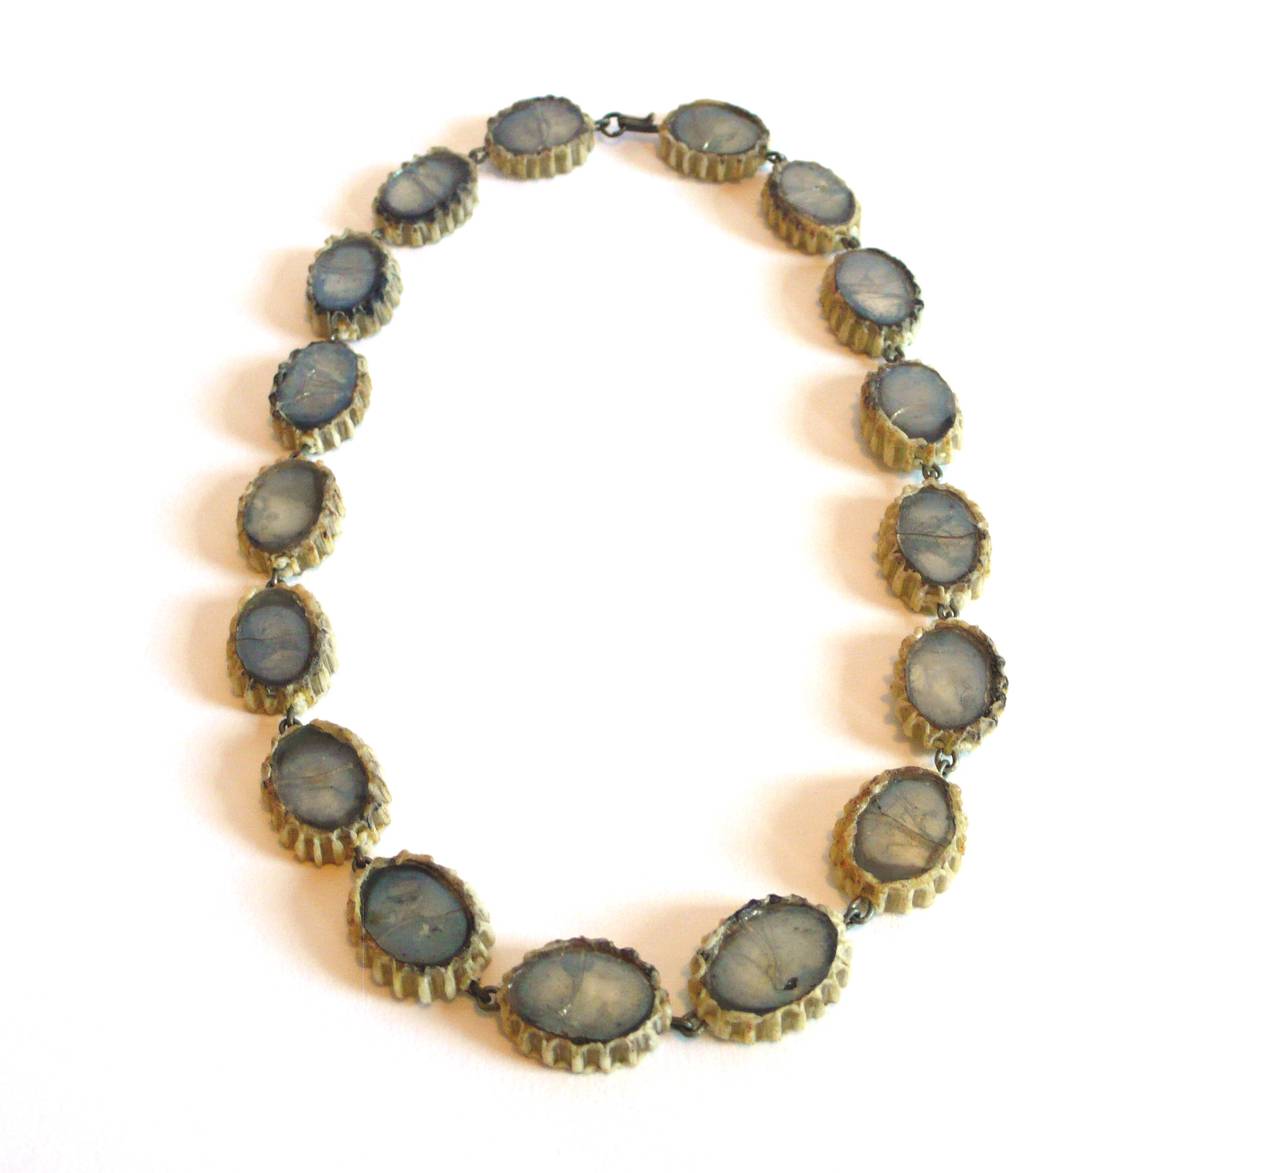 Line Vautrin Talosel necklace encrusted with olive colored mirrored glass.

Sits on neck as a choker. Model Paola.